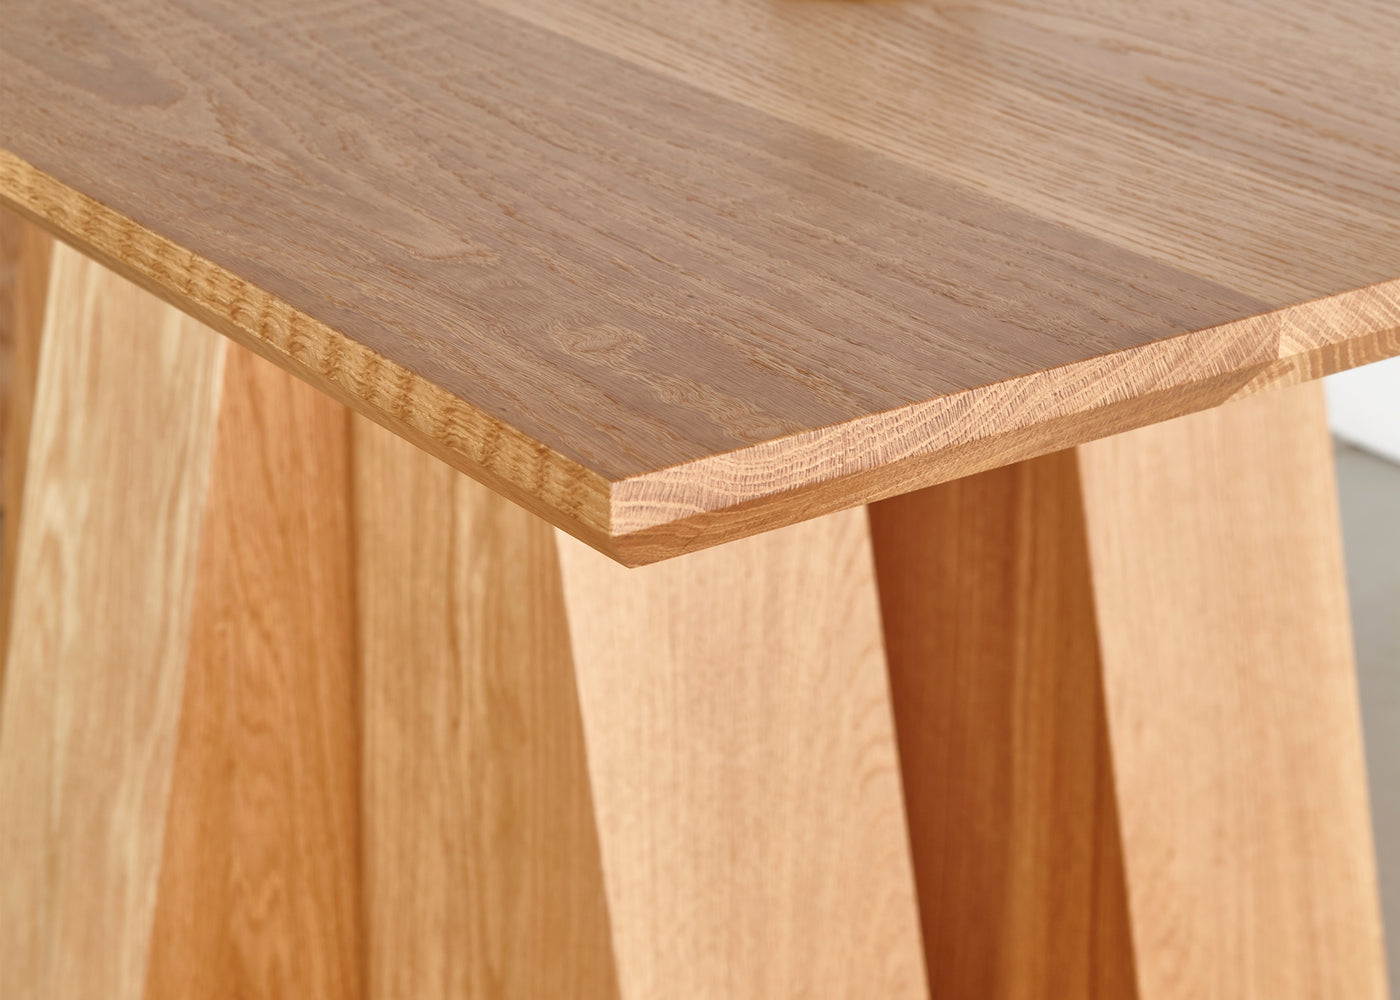 Helle Dining Table, Dual Base